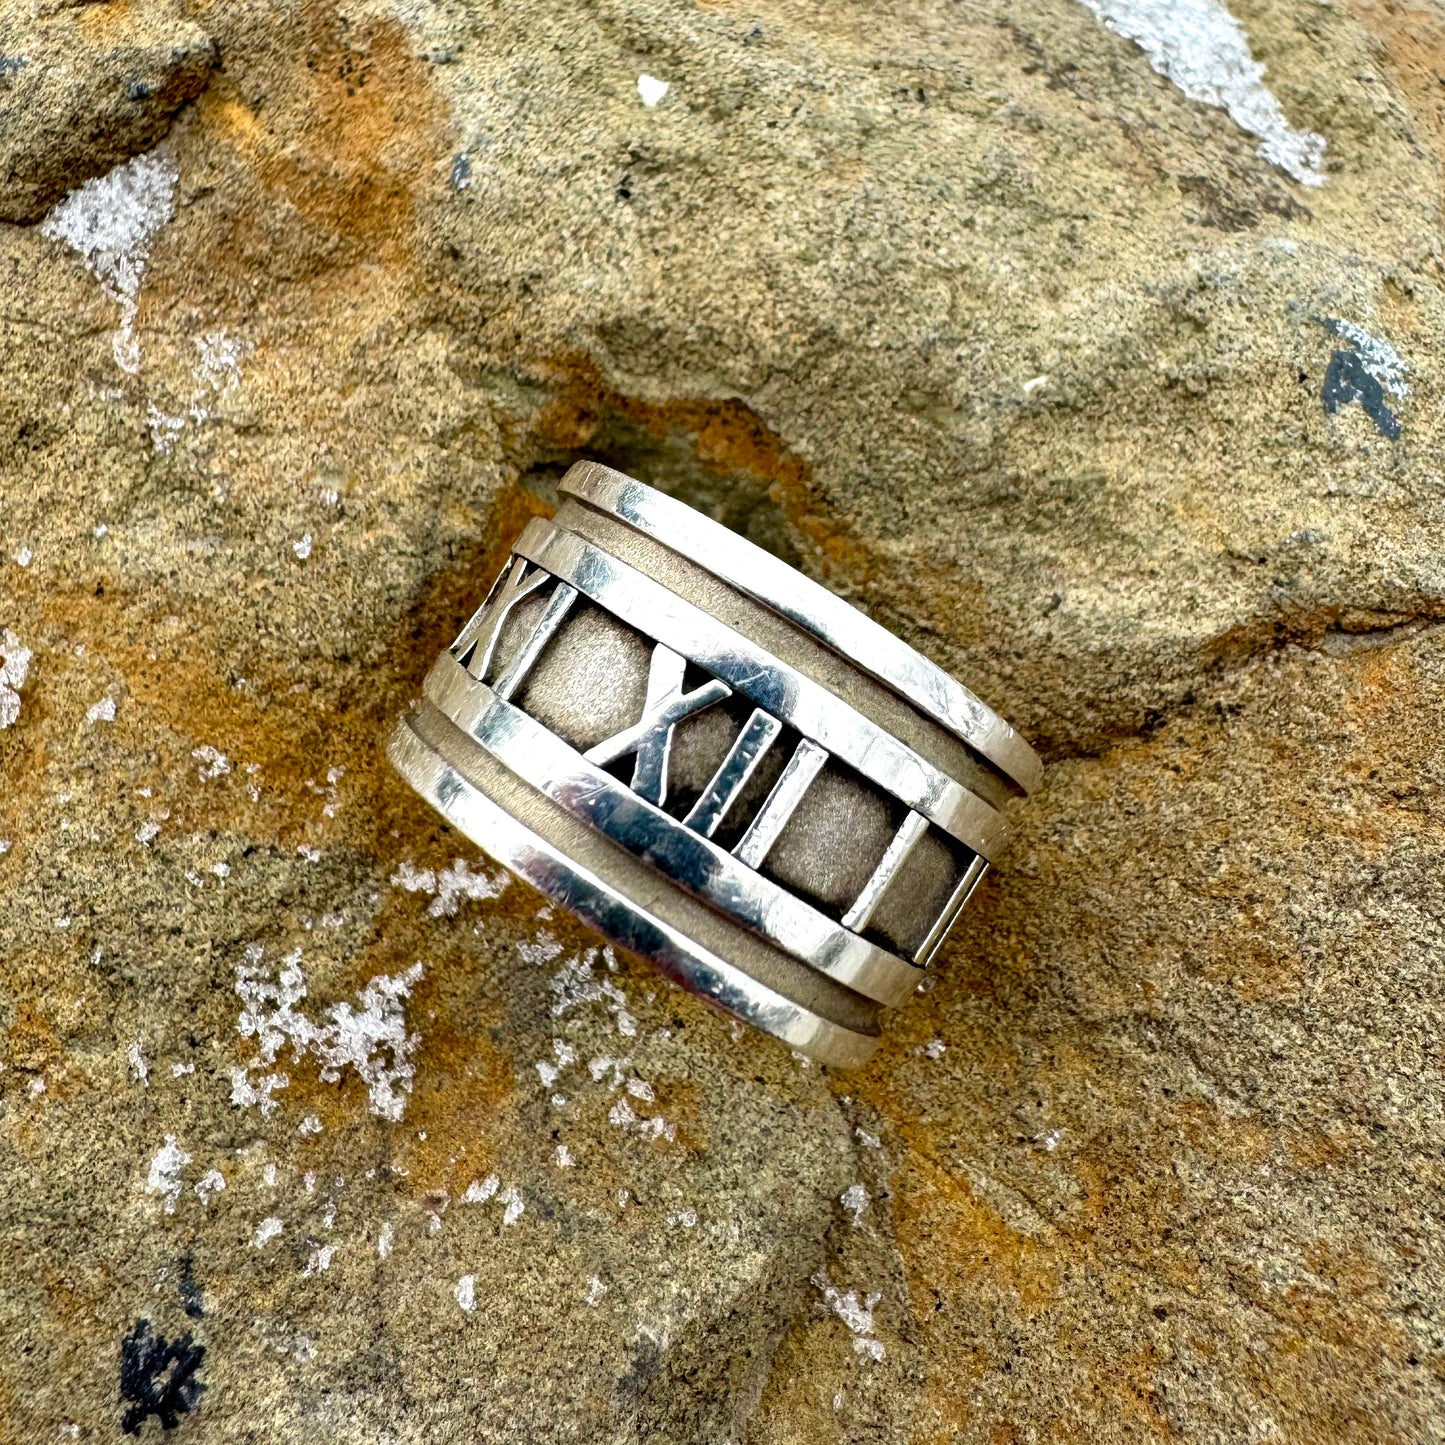 Tiffany & Co Vintage Wide Atlas Band Ring